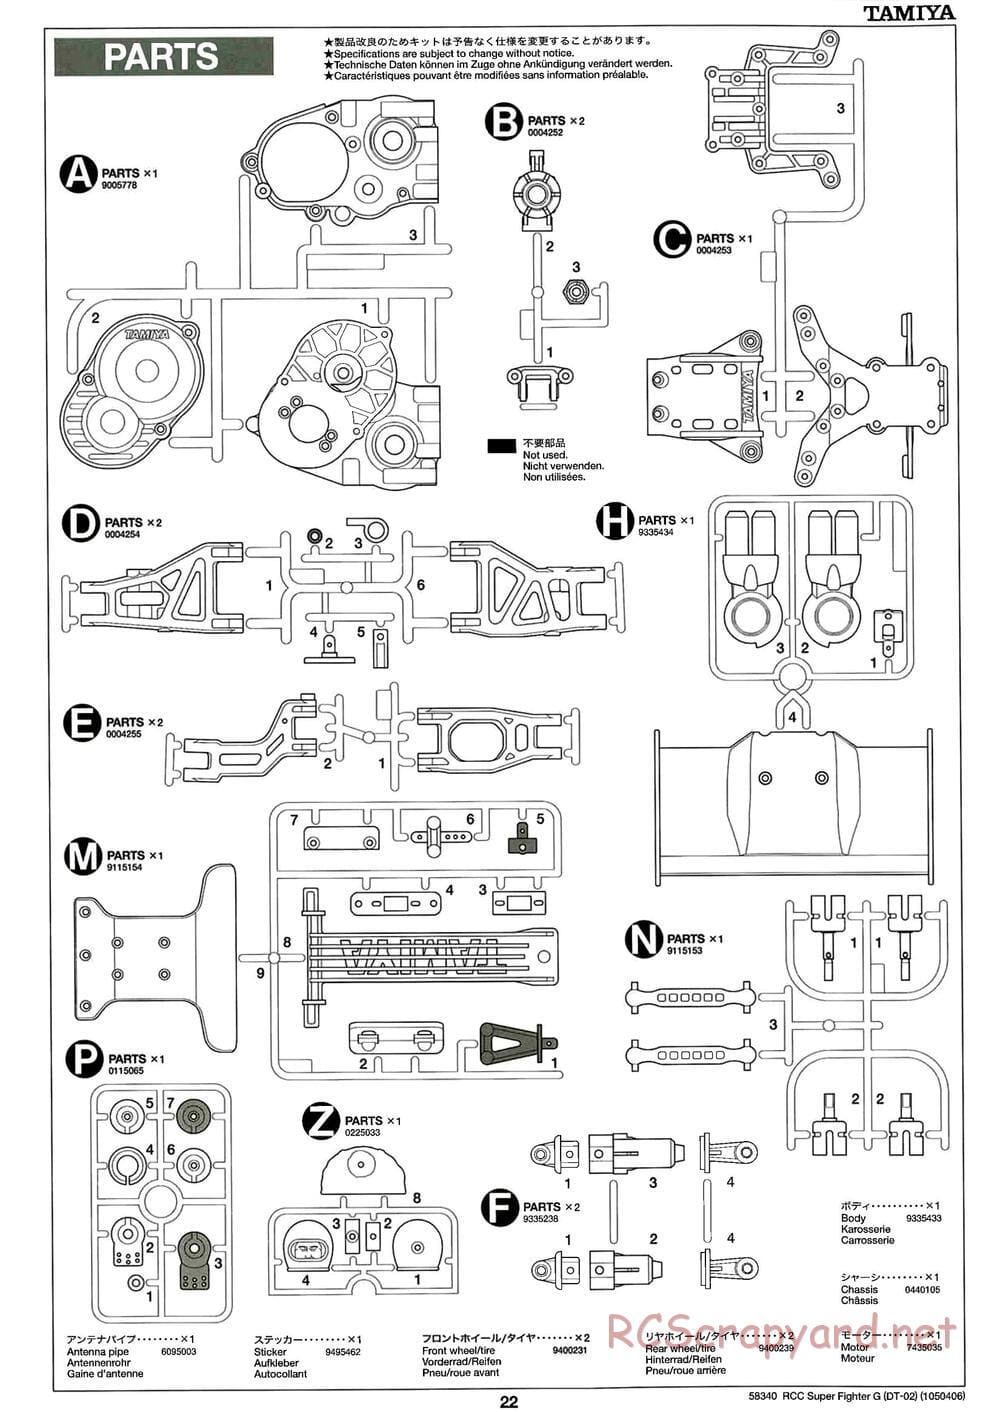 Tamiya - Super Fighter G Chassis - Manual - Page 22